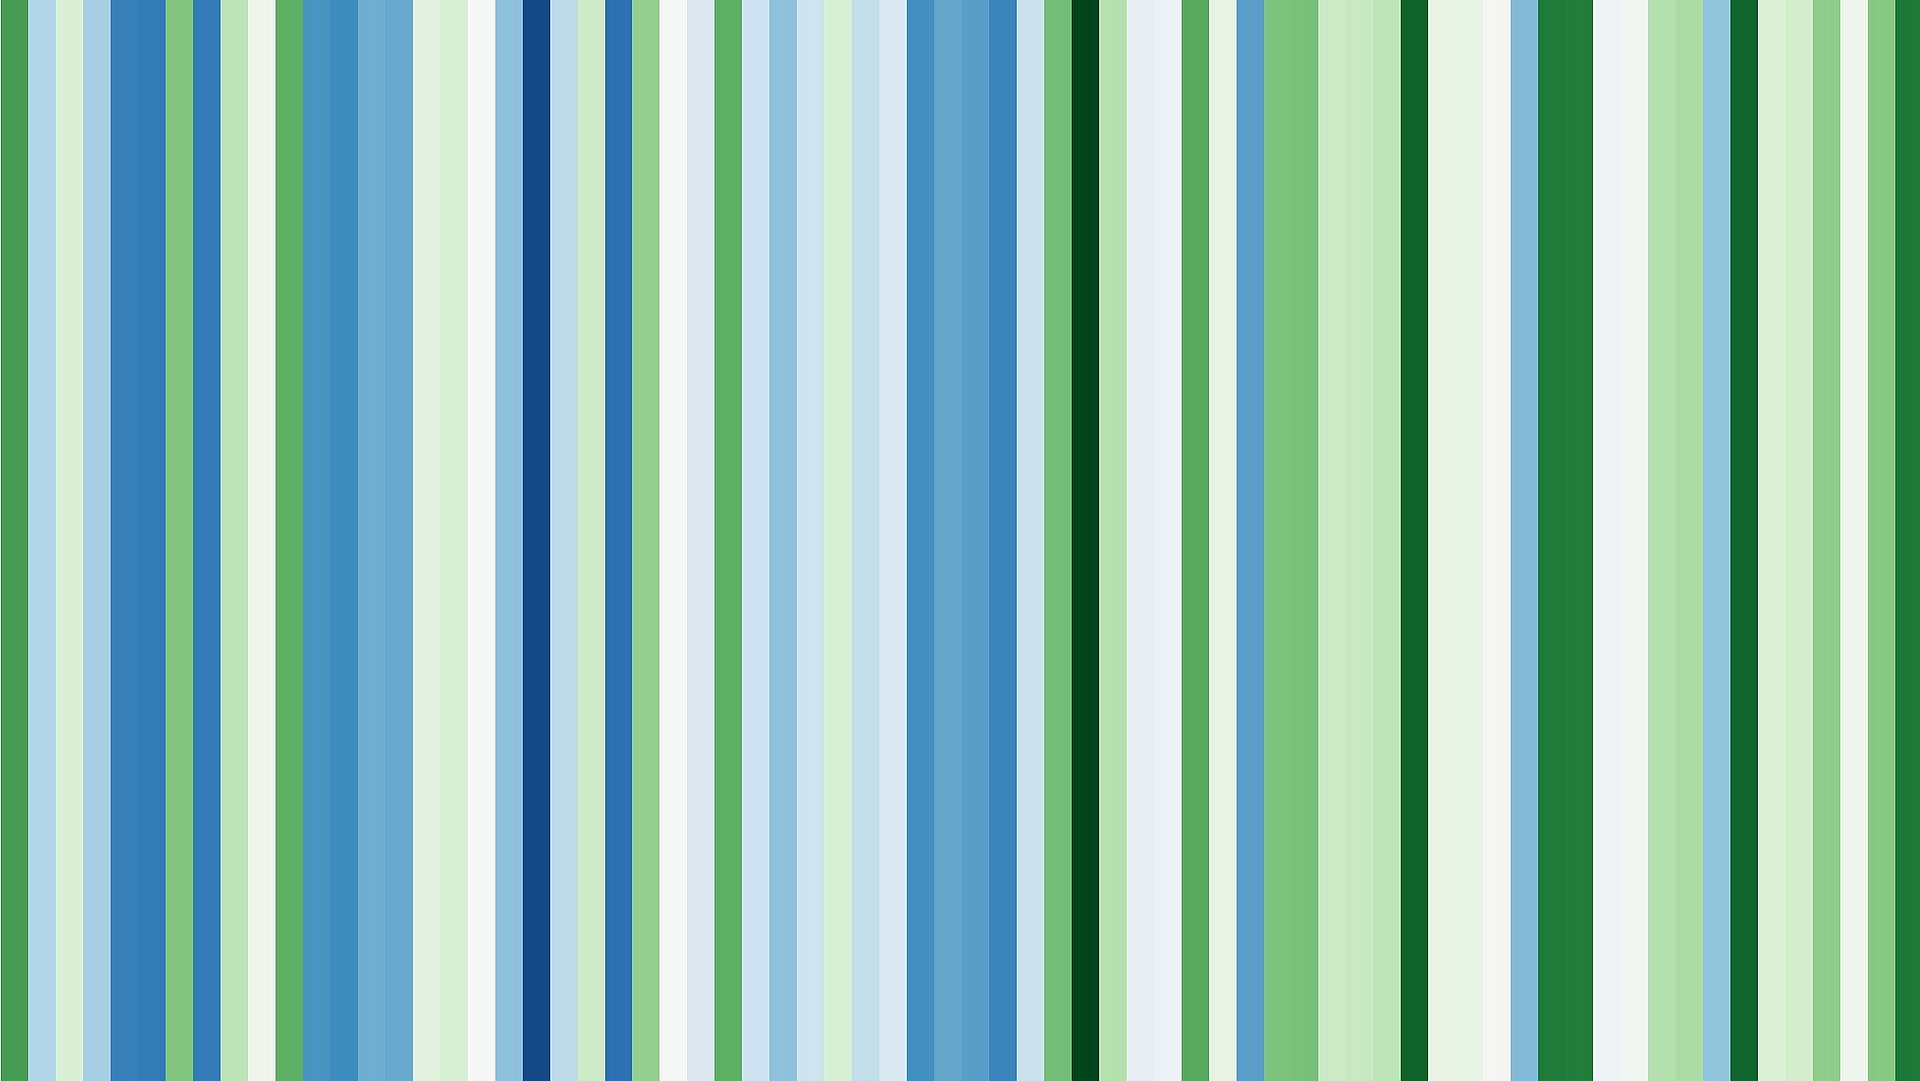 Green warming stripes for first spring (forsythia flowering) in Bavaria, Germany (1951-2020)